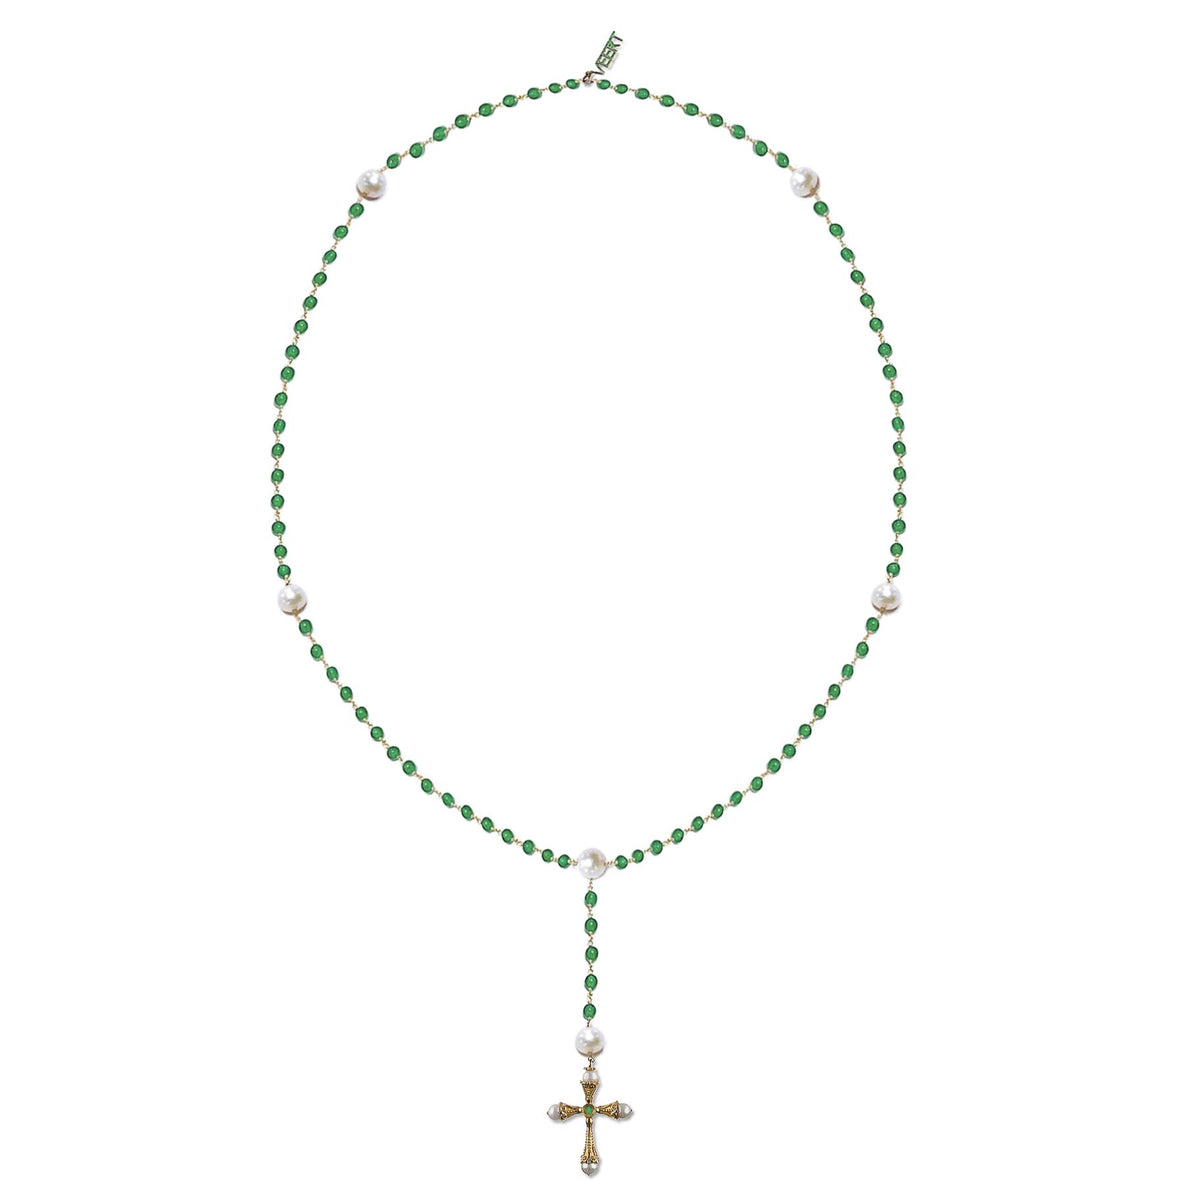 The Green Onyx & Freshwater Pearl Necklace